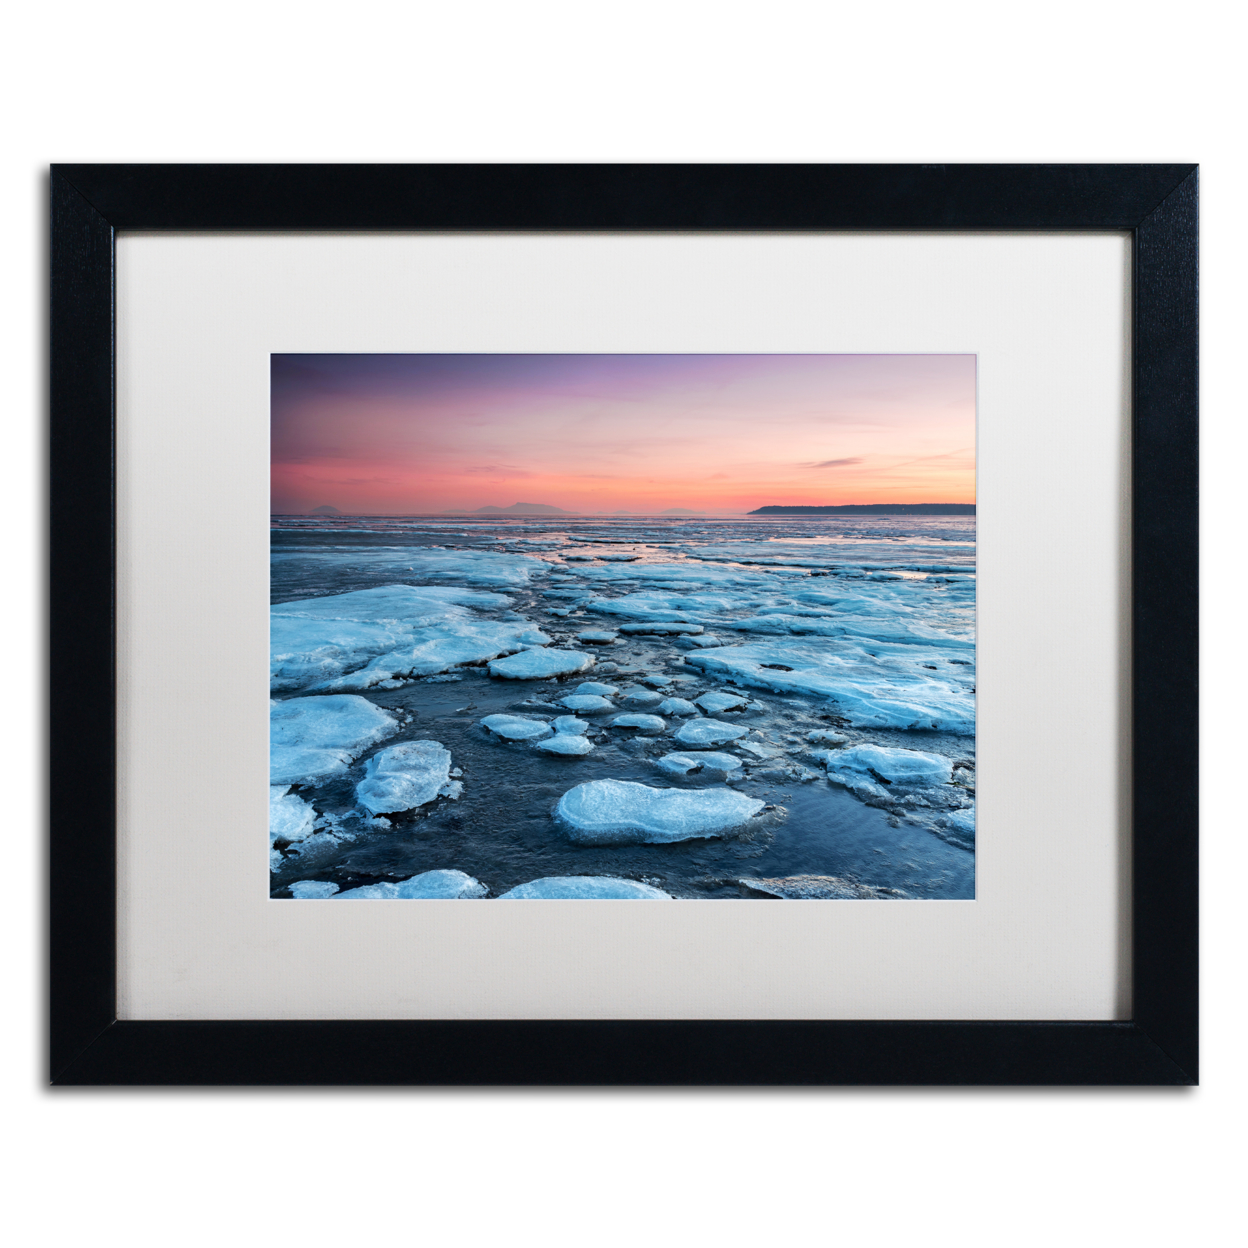 Pierre Leclerc 'Icy Sunrise' Black Wooden Framed Art 18 X 22 Inches